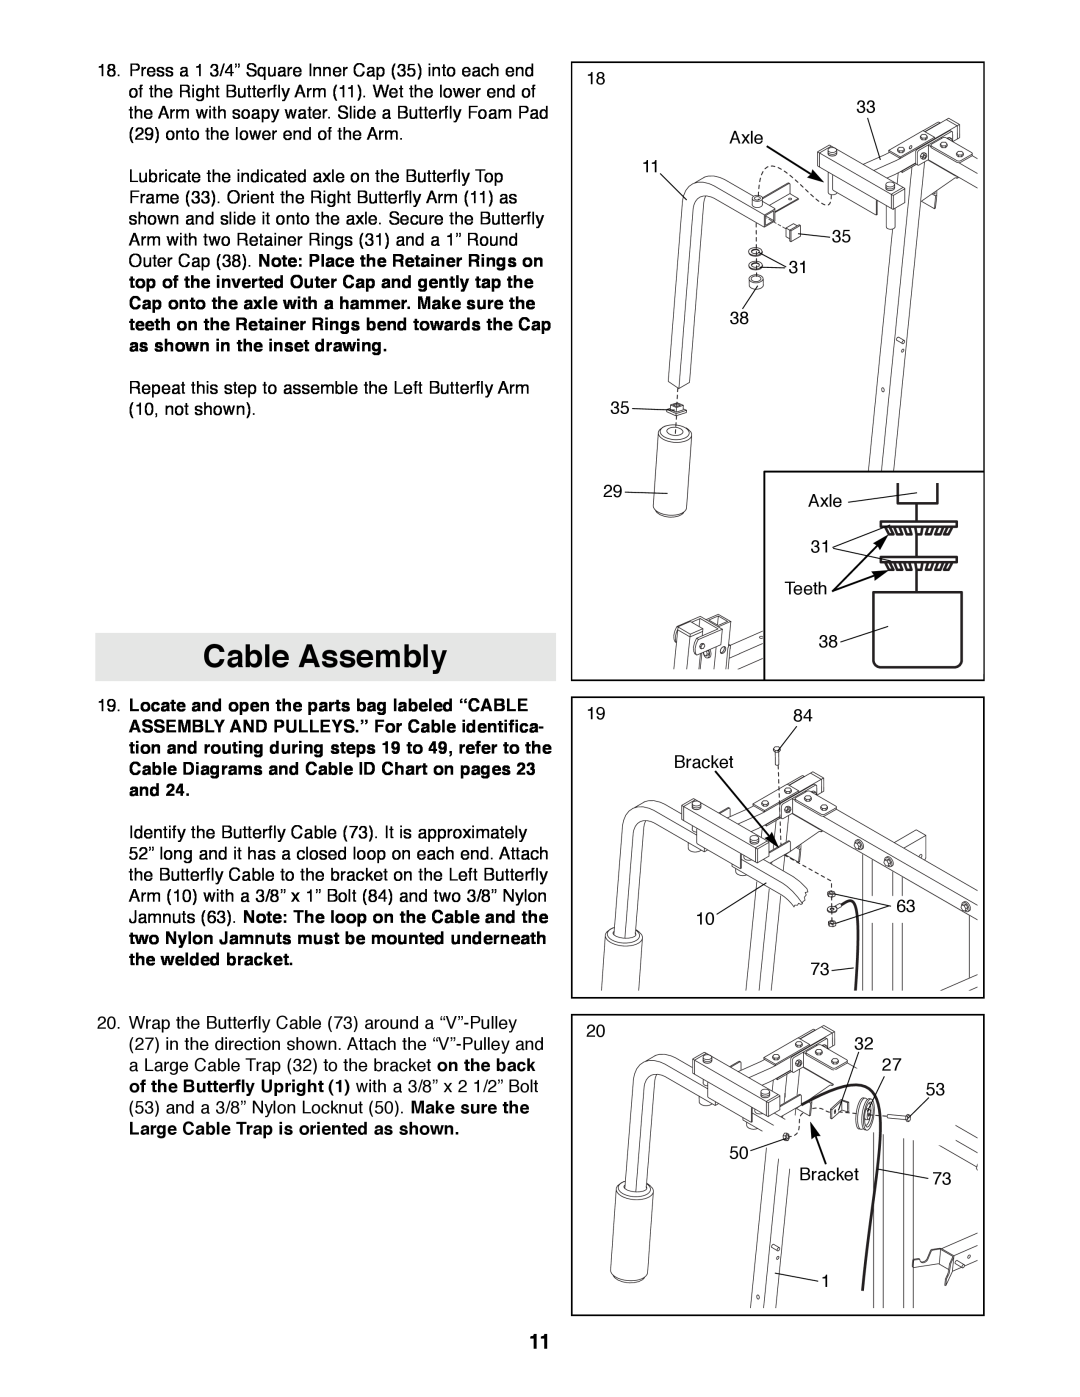 Weider WESY99490 manual Cable Assembly, Large Cable Trap is oriented as shown 